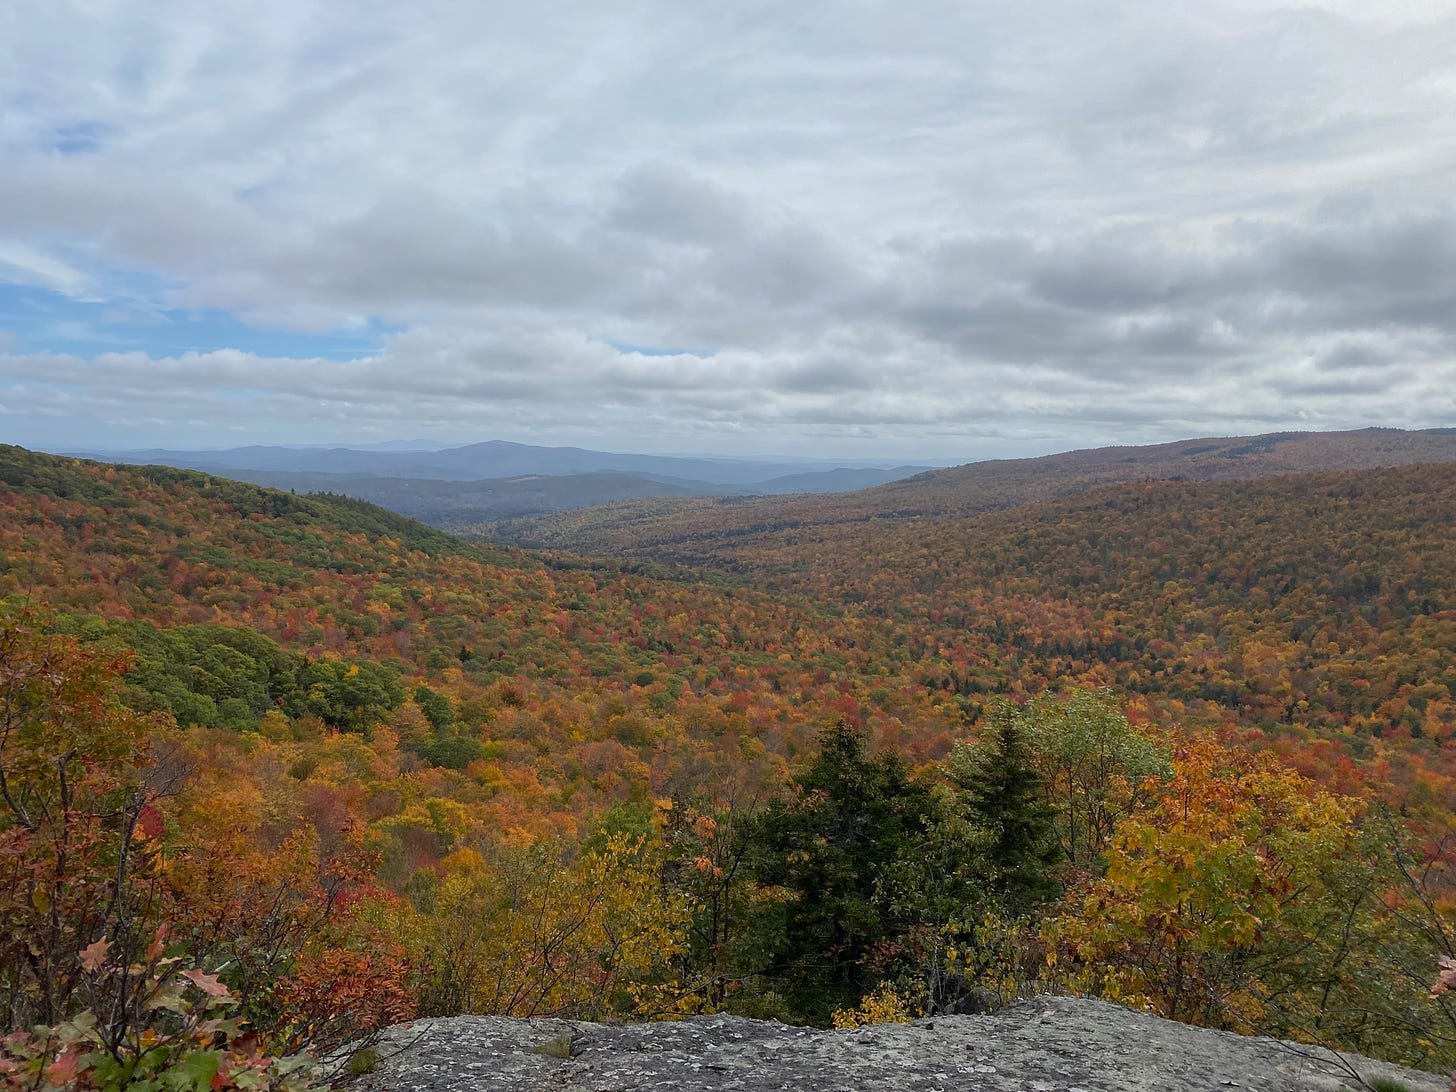 A mountain vista, looking out on hills carpeted with red, gold, and orange leaves. Blue mountains are visible on the horizon, and the sky is filled with white and grey clouds.